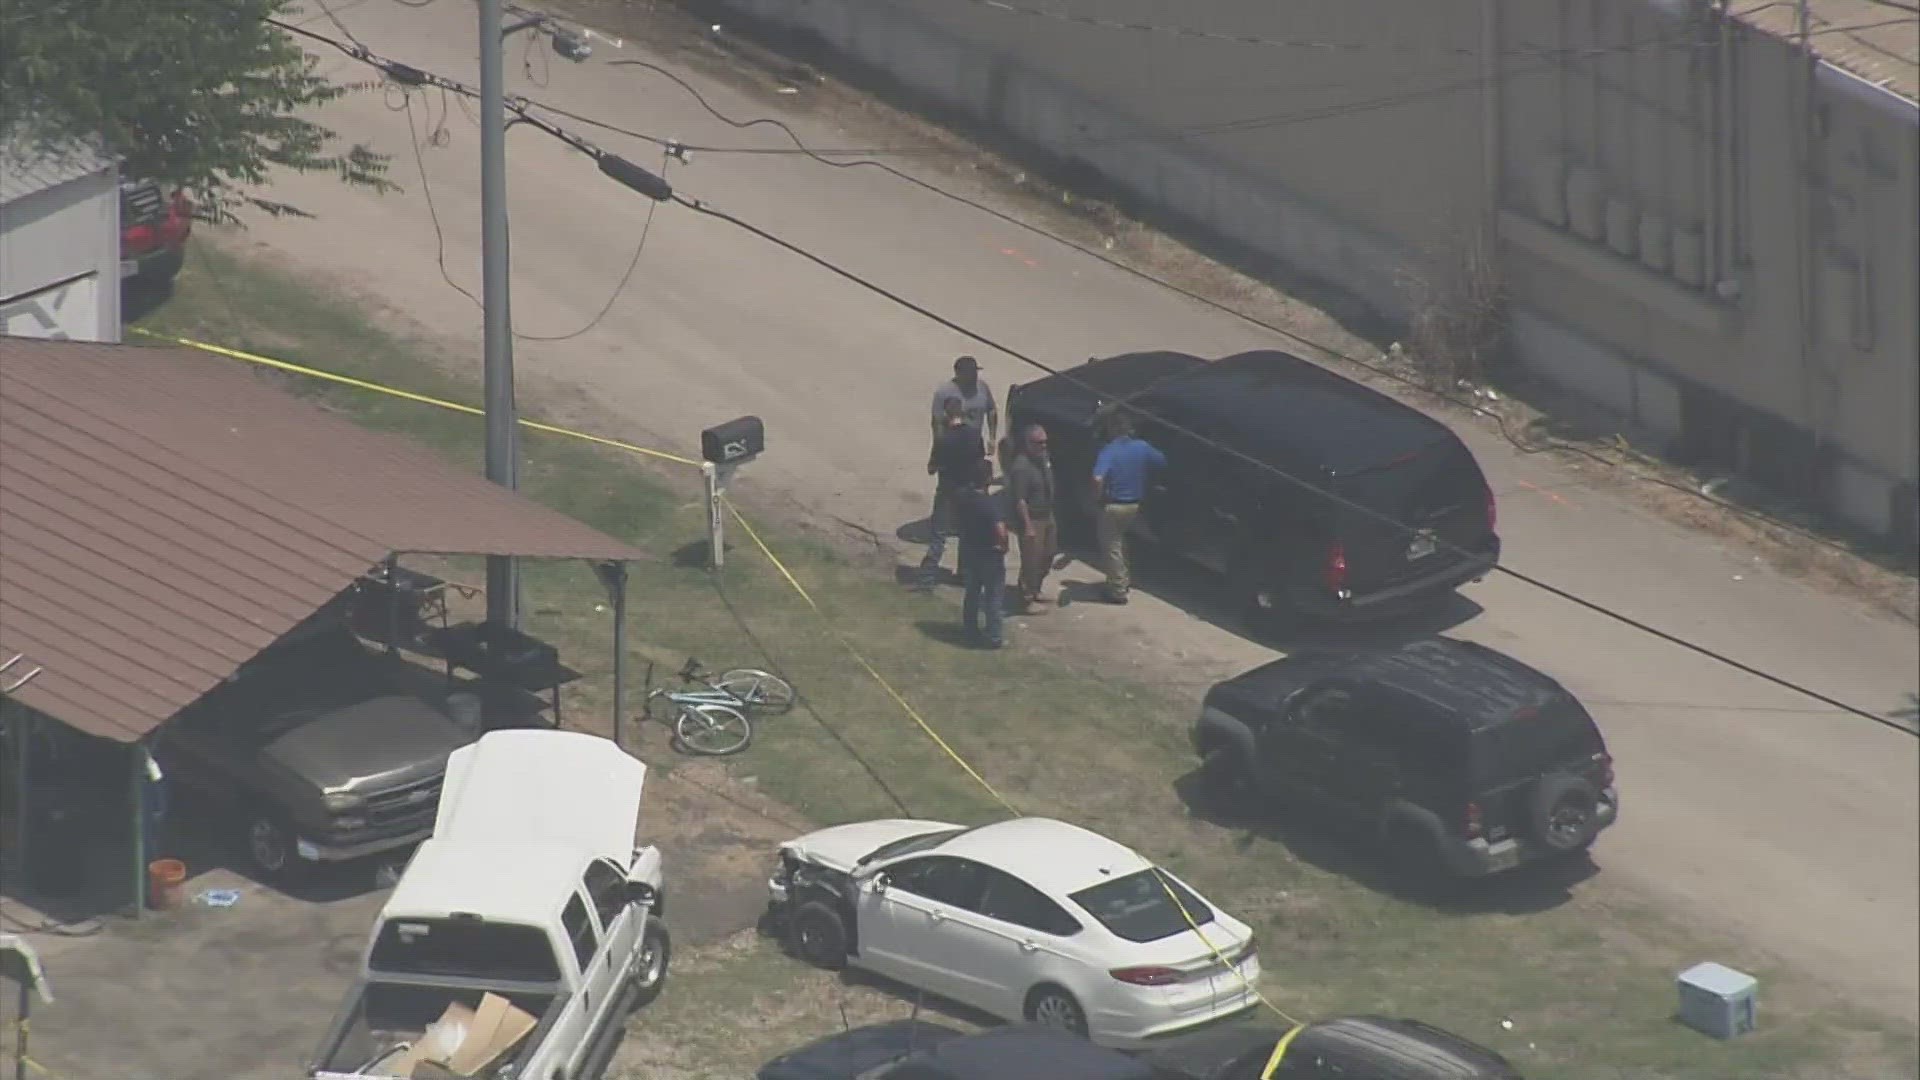 Police responded to a call for shots fired in the 1600 block of North Austin Street in Seguin around 12:05 p.m.